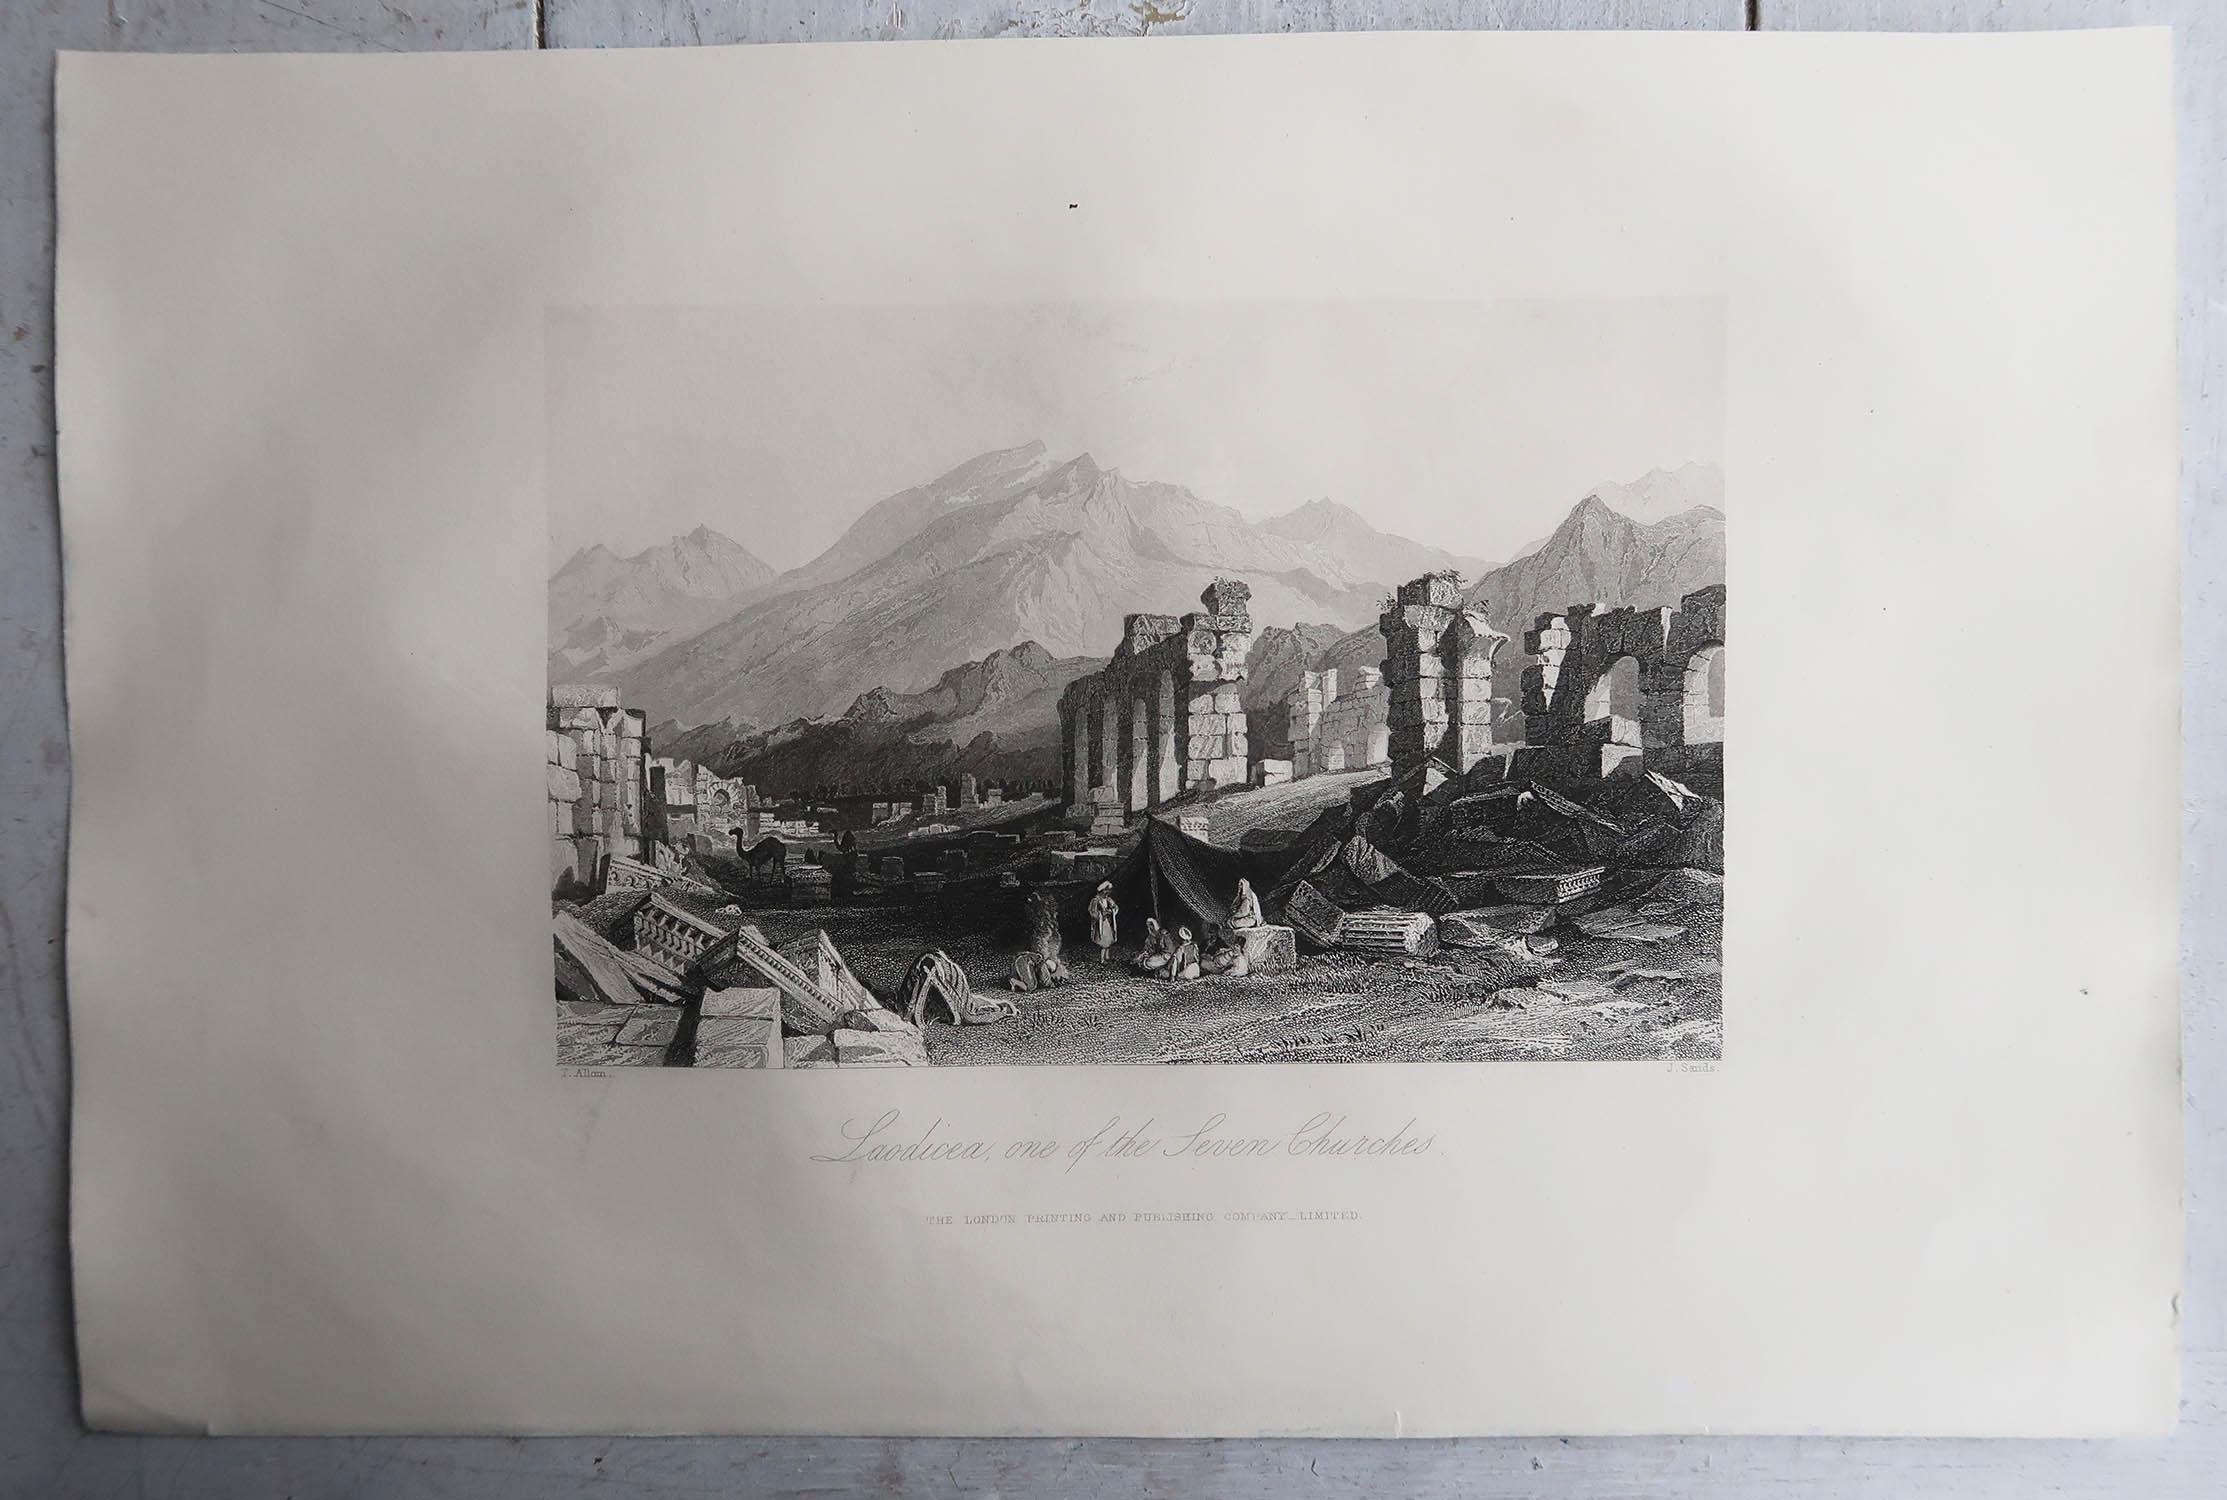 English Set of 9 Original Antique Prints of the Levant / Holy Land /Middle East. C 1850